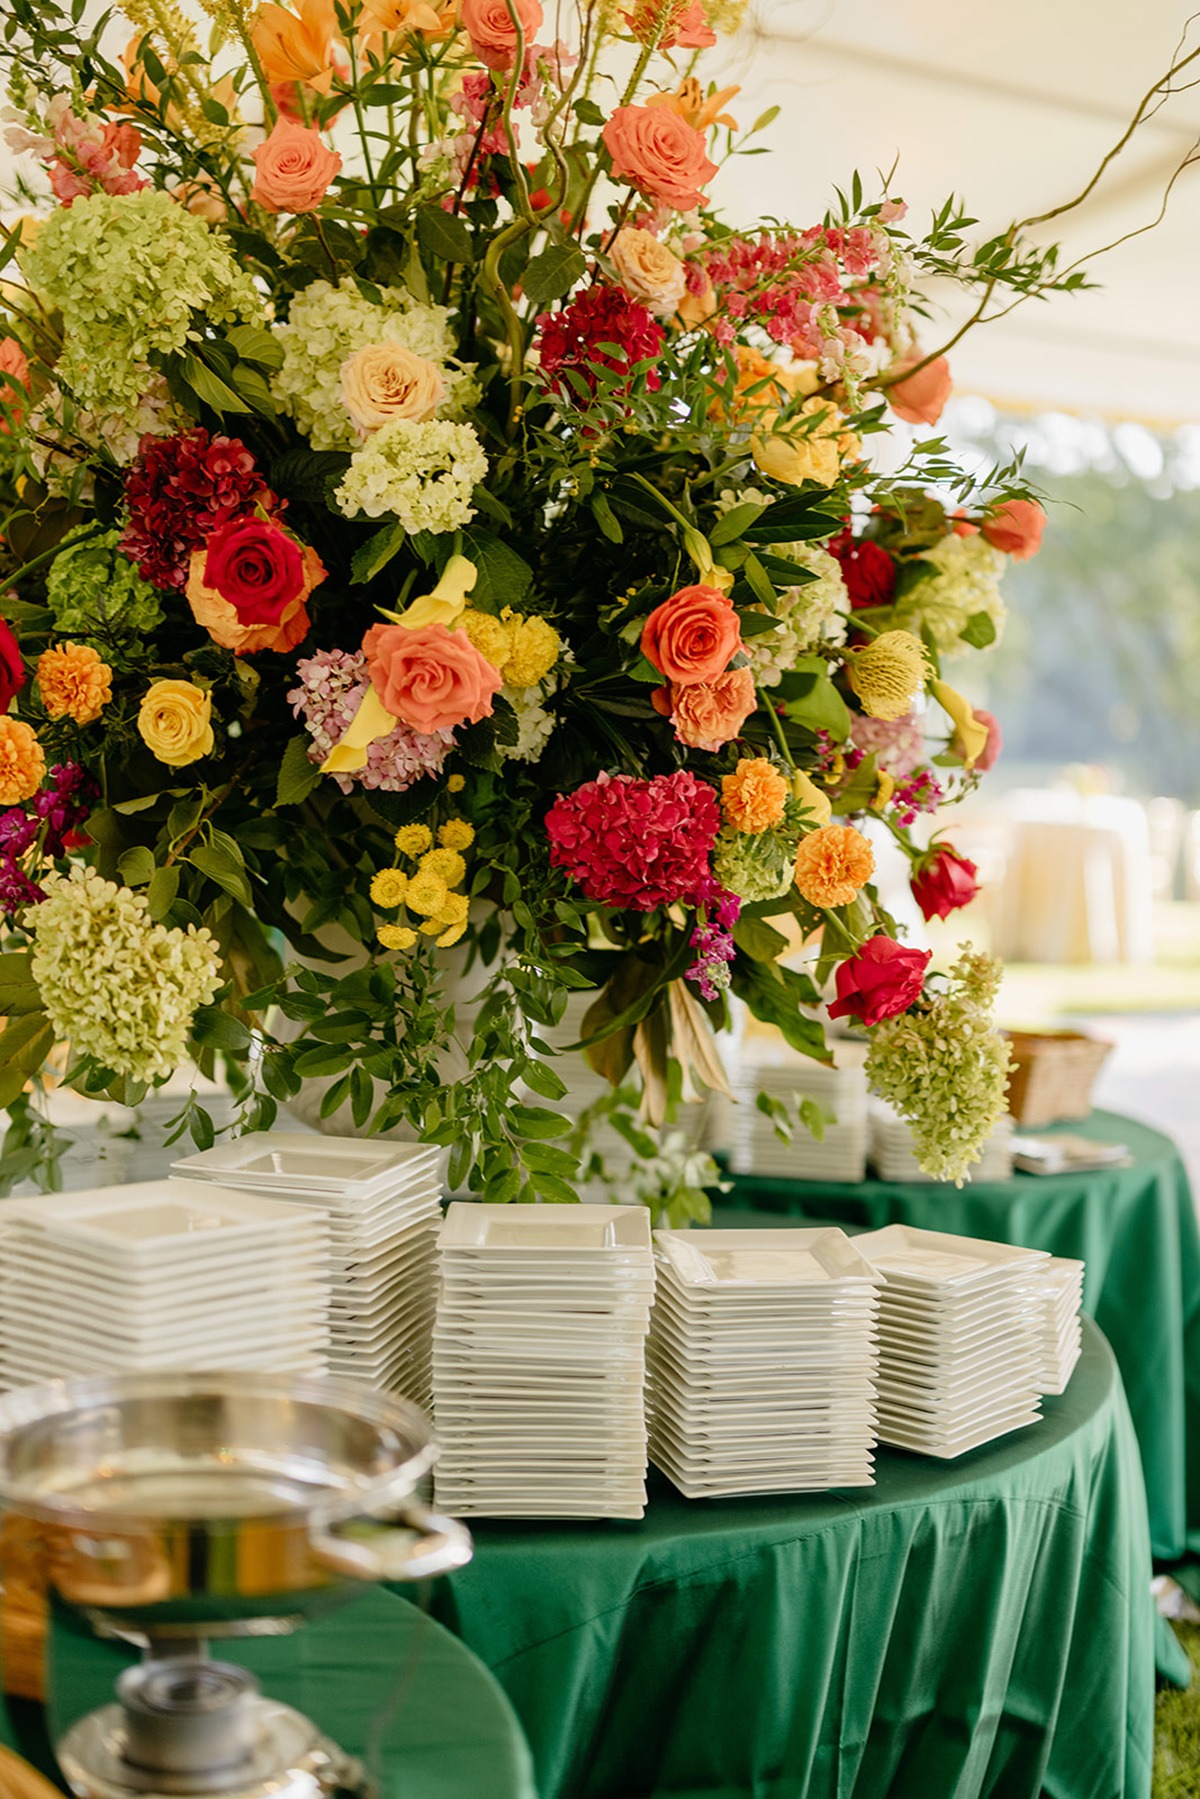 Bold Colors & Blended Cultures at this Unforgettable Indian-Fusion Wedding